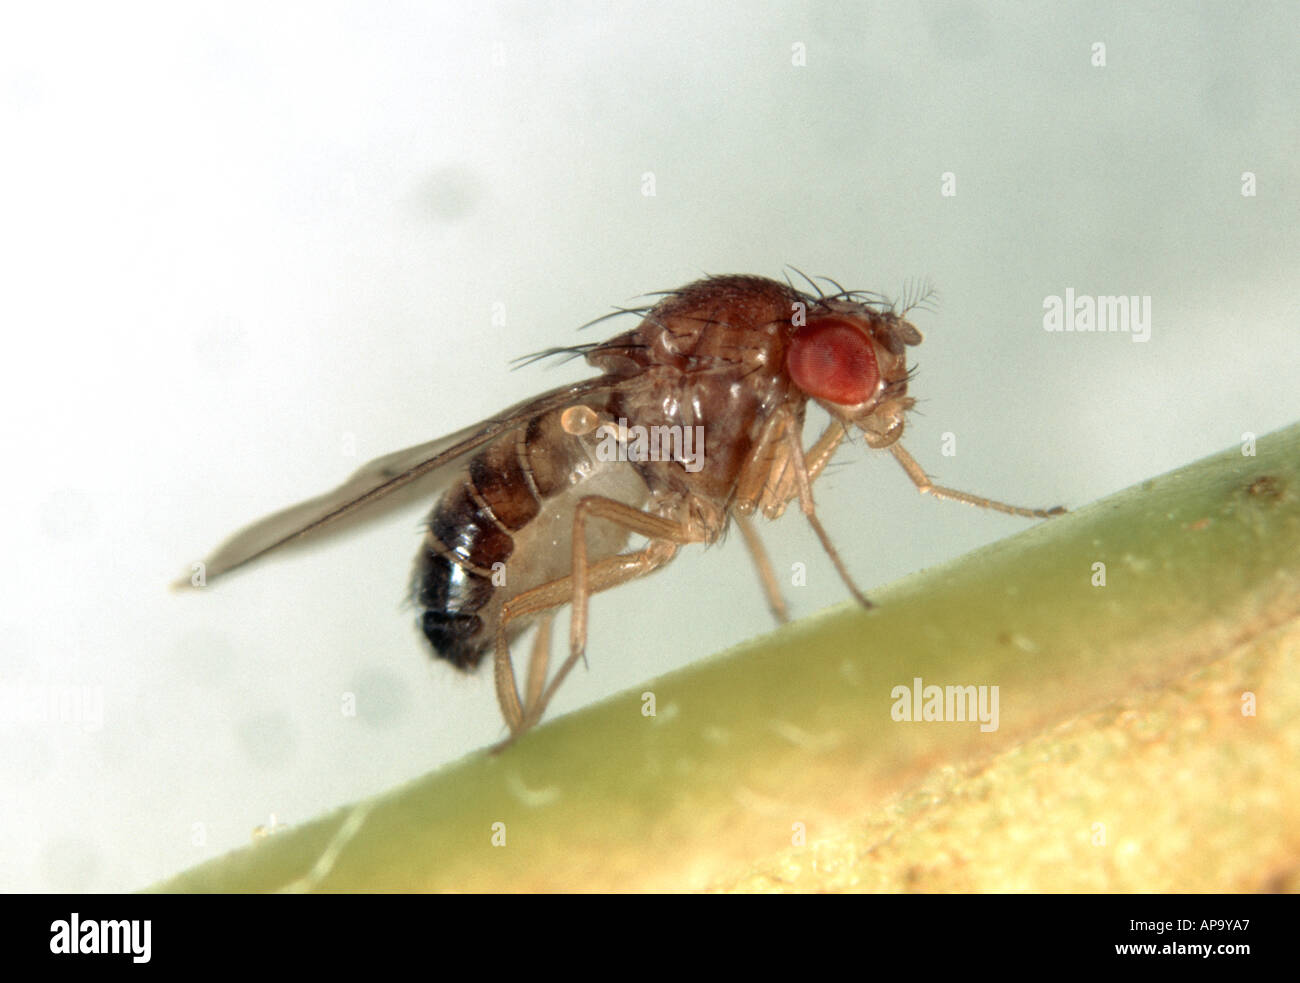 Adult fruit fly Drosophila sp a genus used for experiments for their rapid breeding cycle Stock Photo